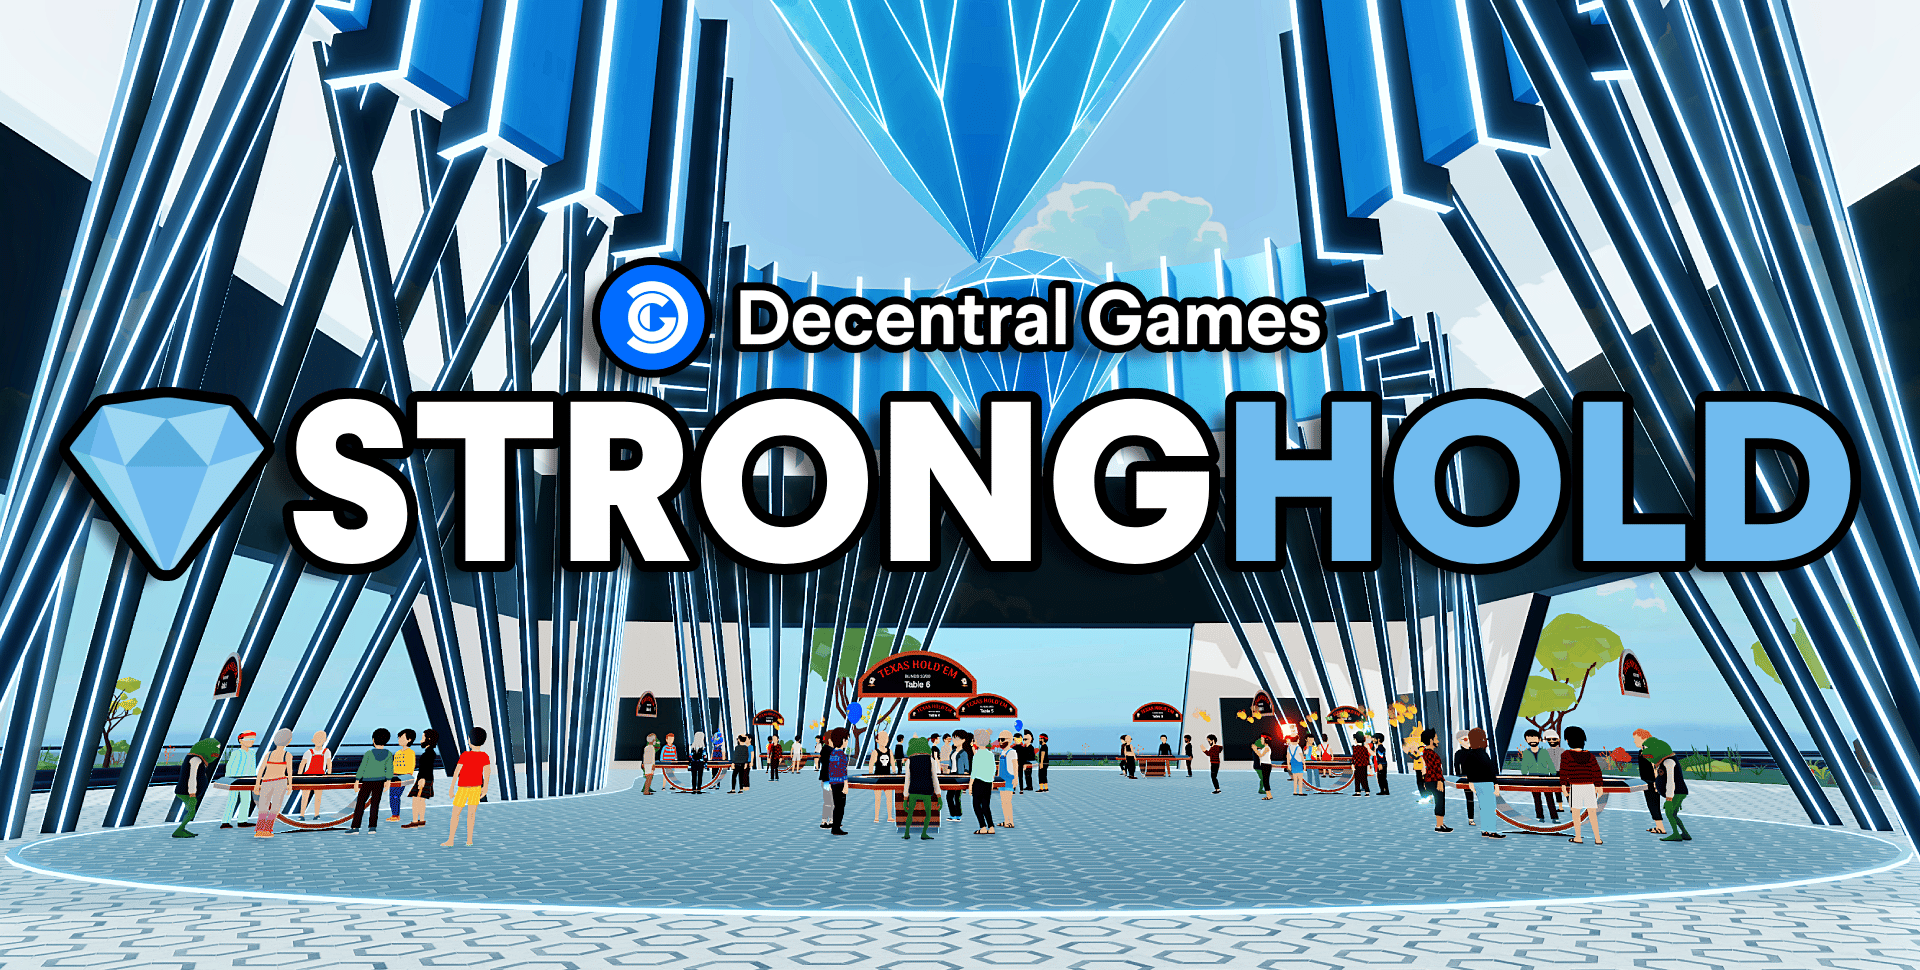 Decentral Games Launches 2nd ICE Poker Venue: The Stronghold